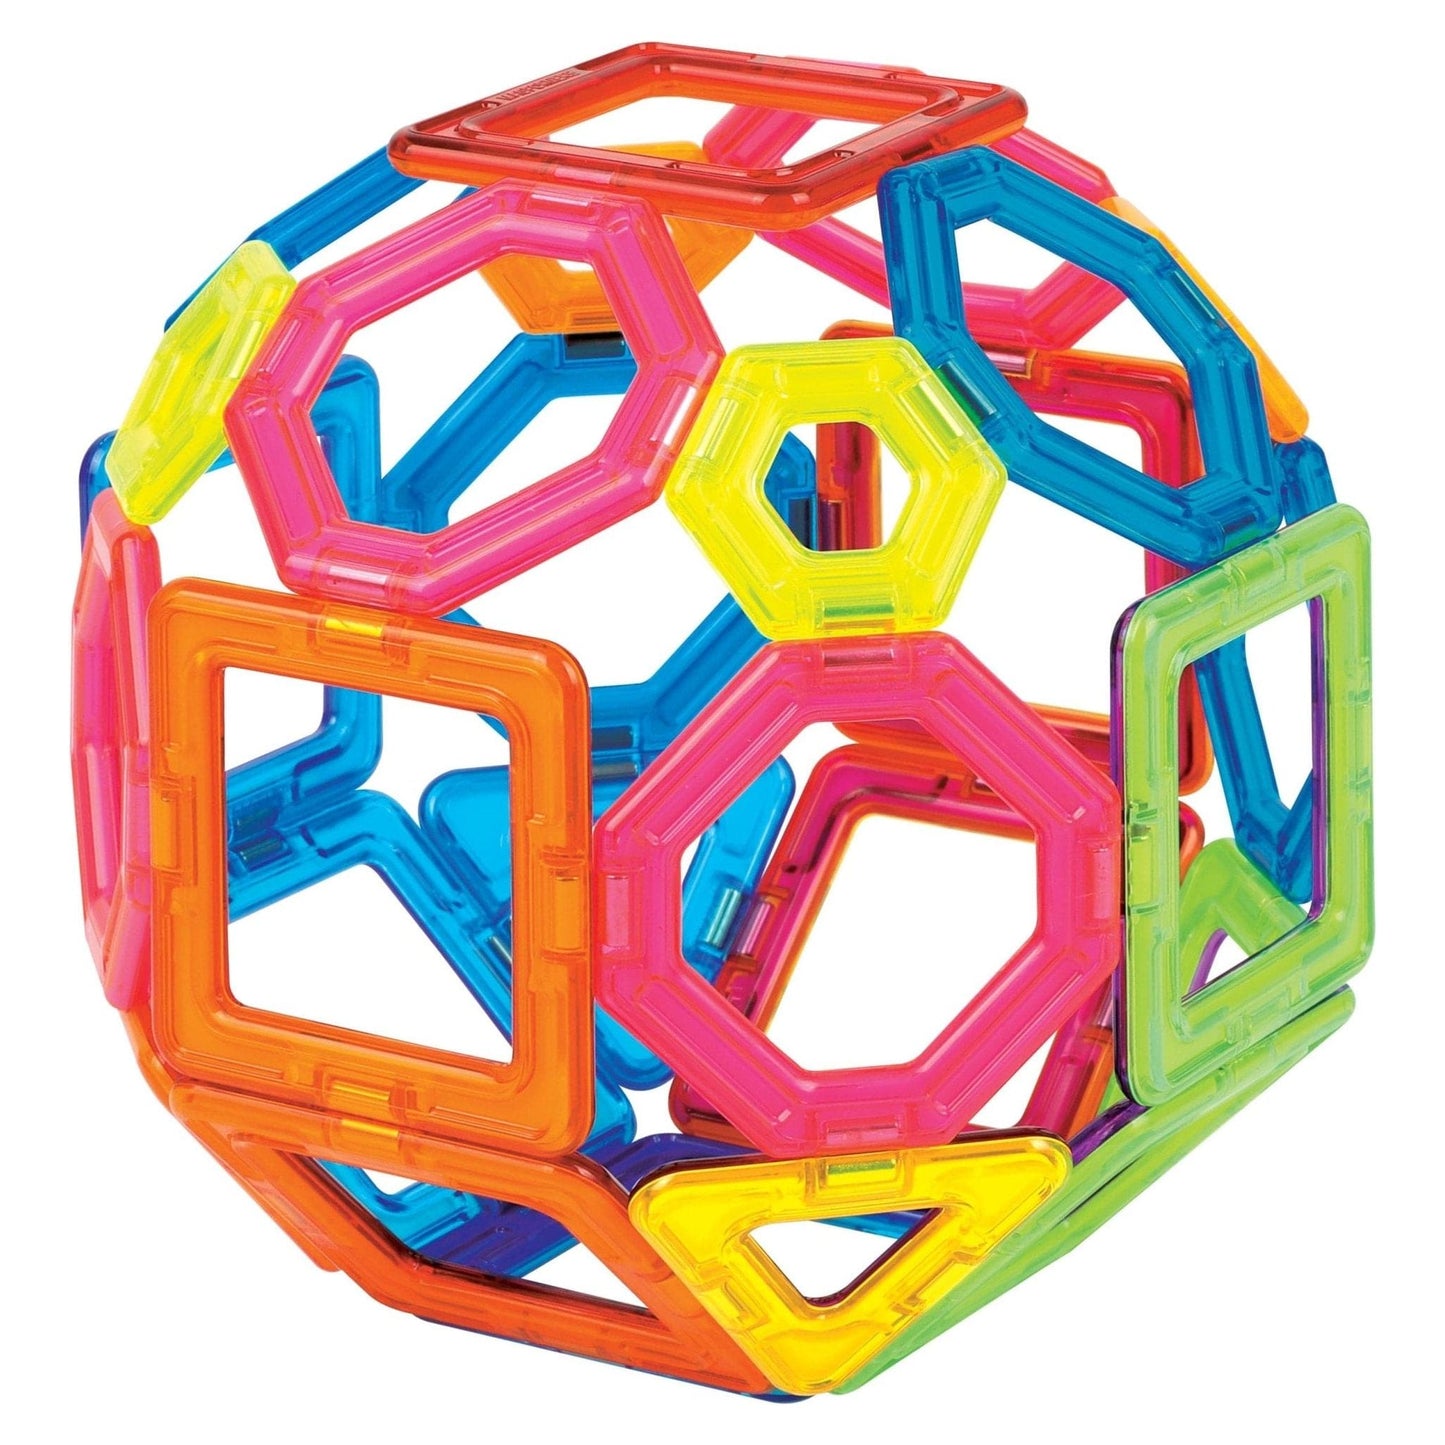 ball made from Magformers Construction Toys Challenger 30 Piece Set